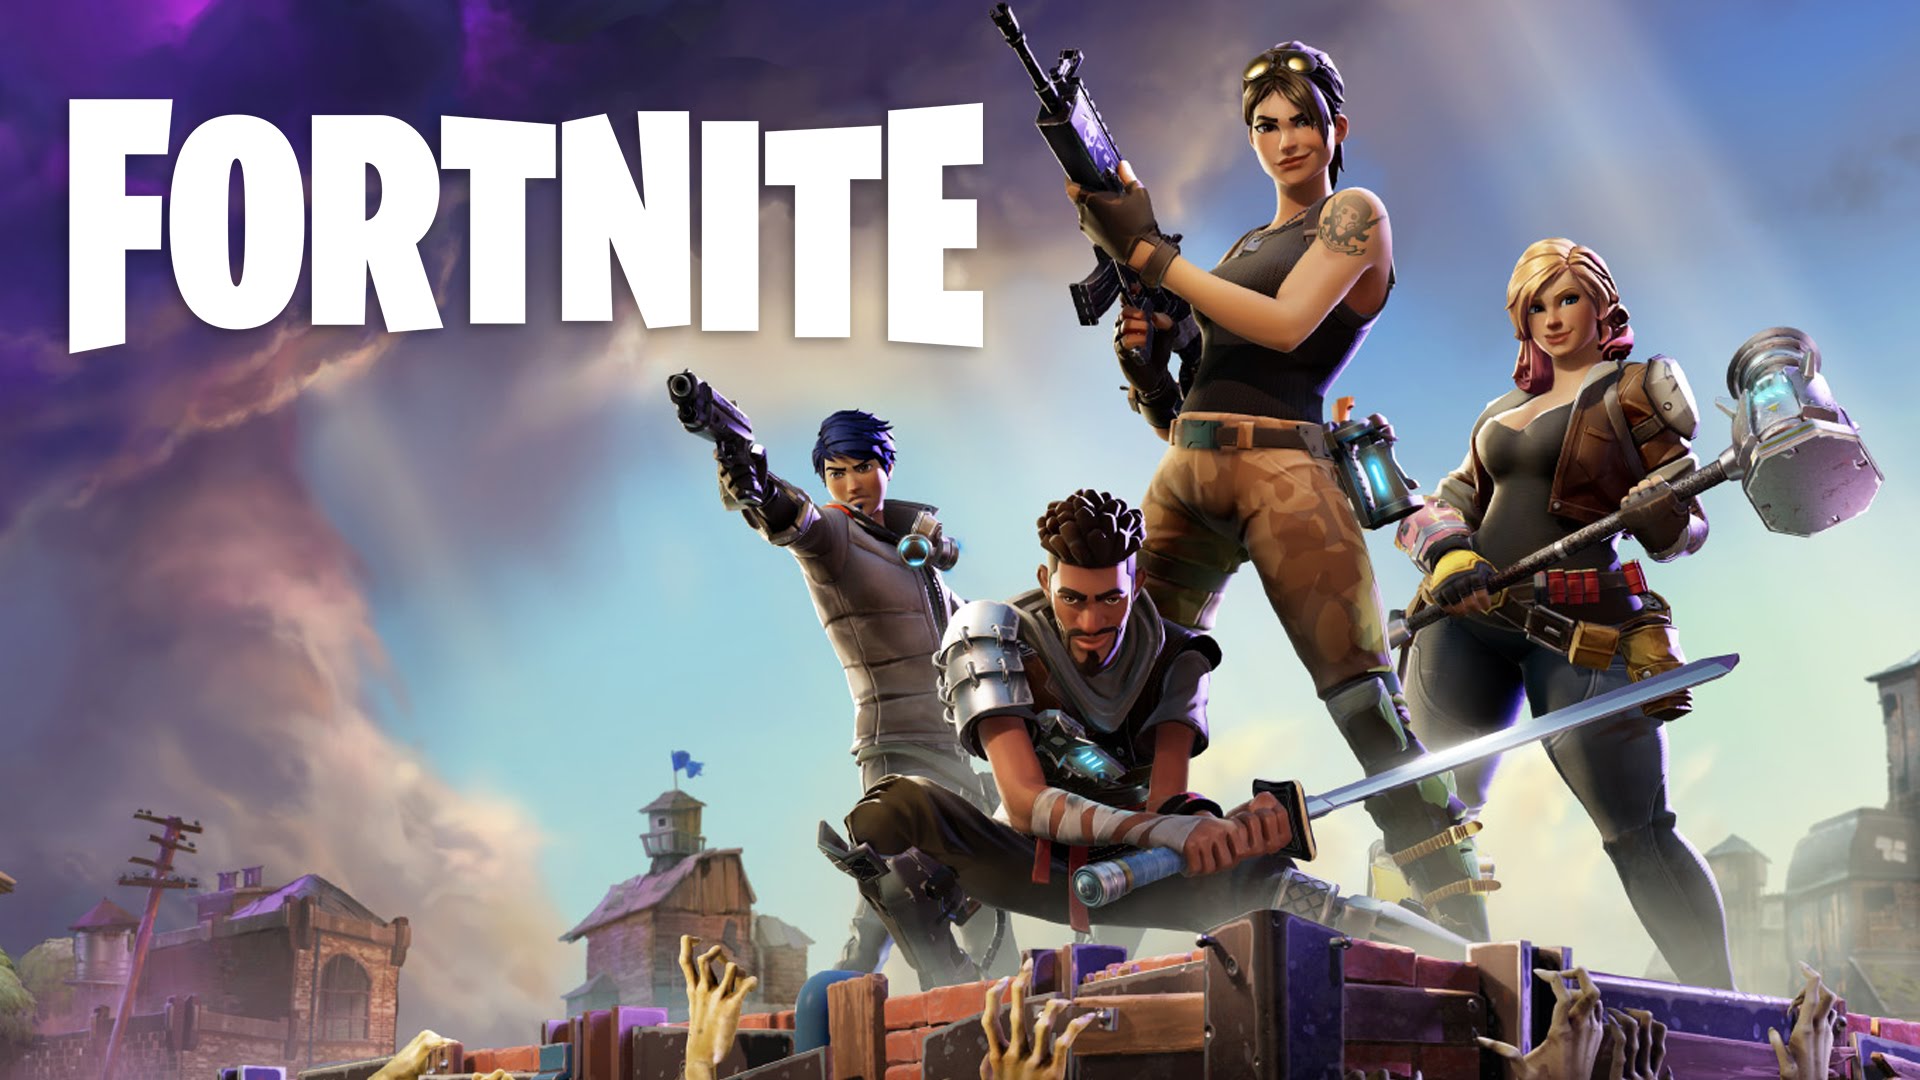 fortnite players disgruntled after being killed during the one time event rocket launch - fortnite fake kill generator